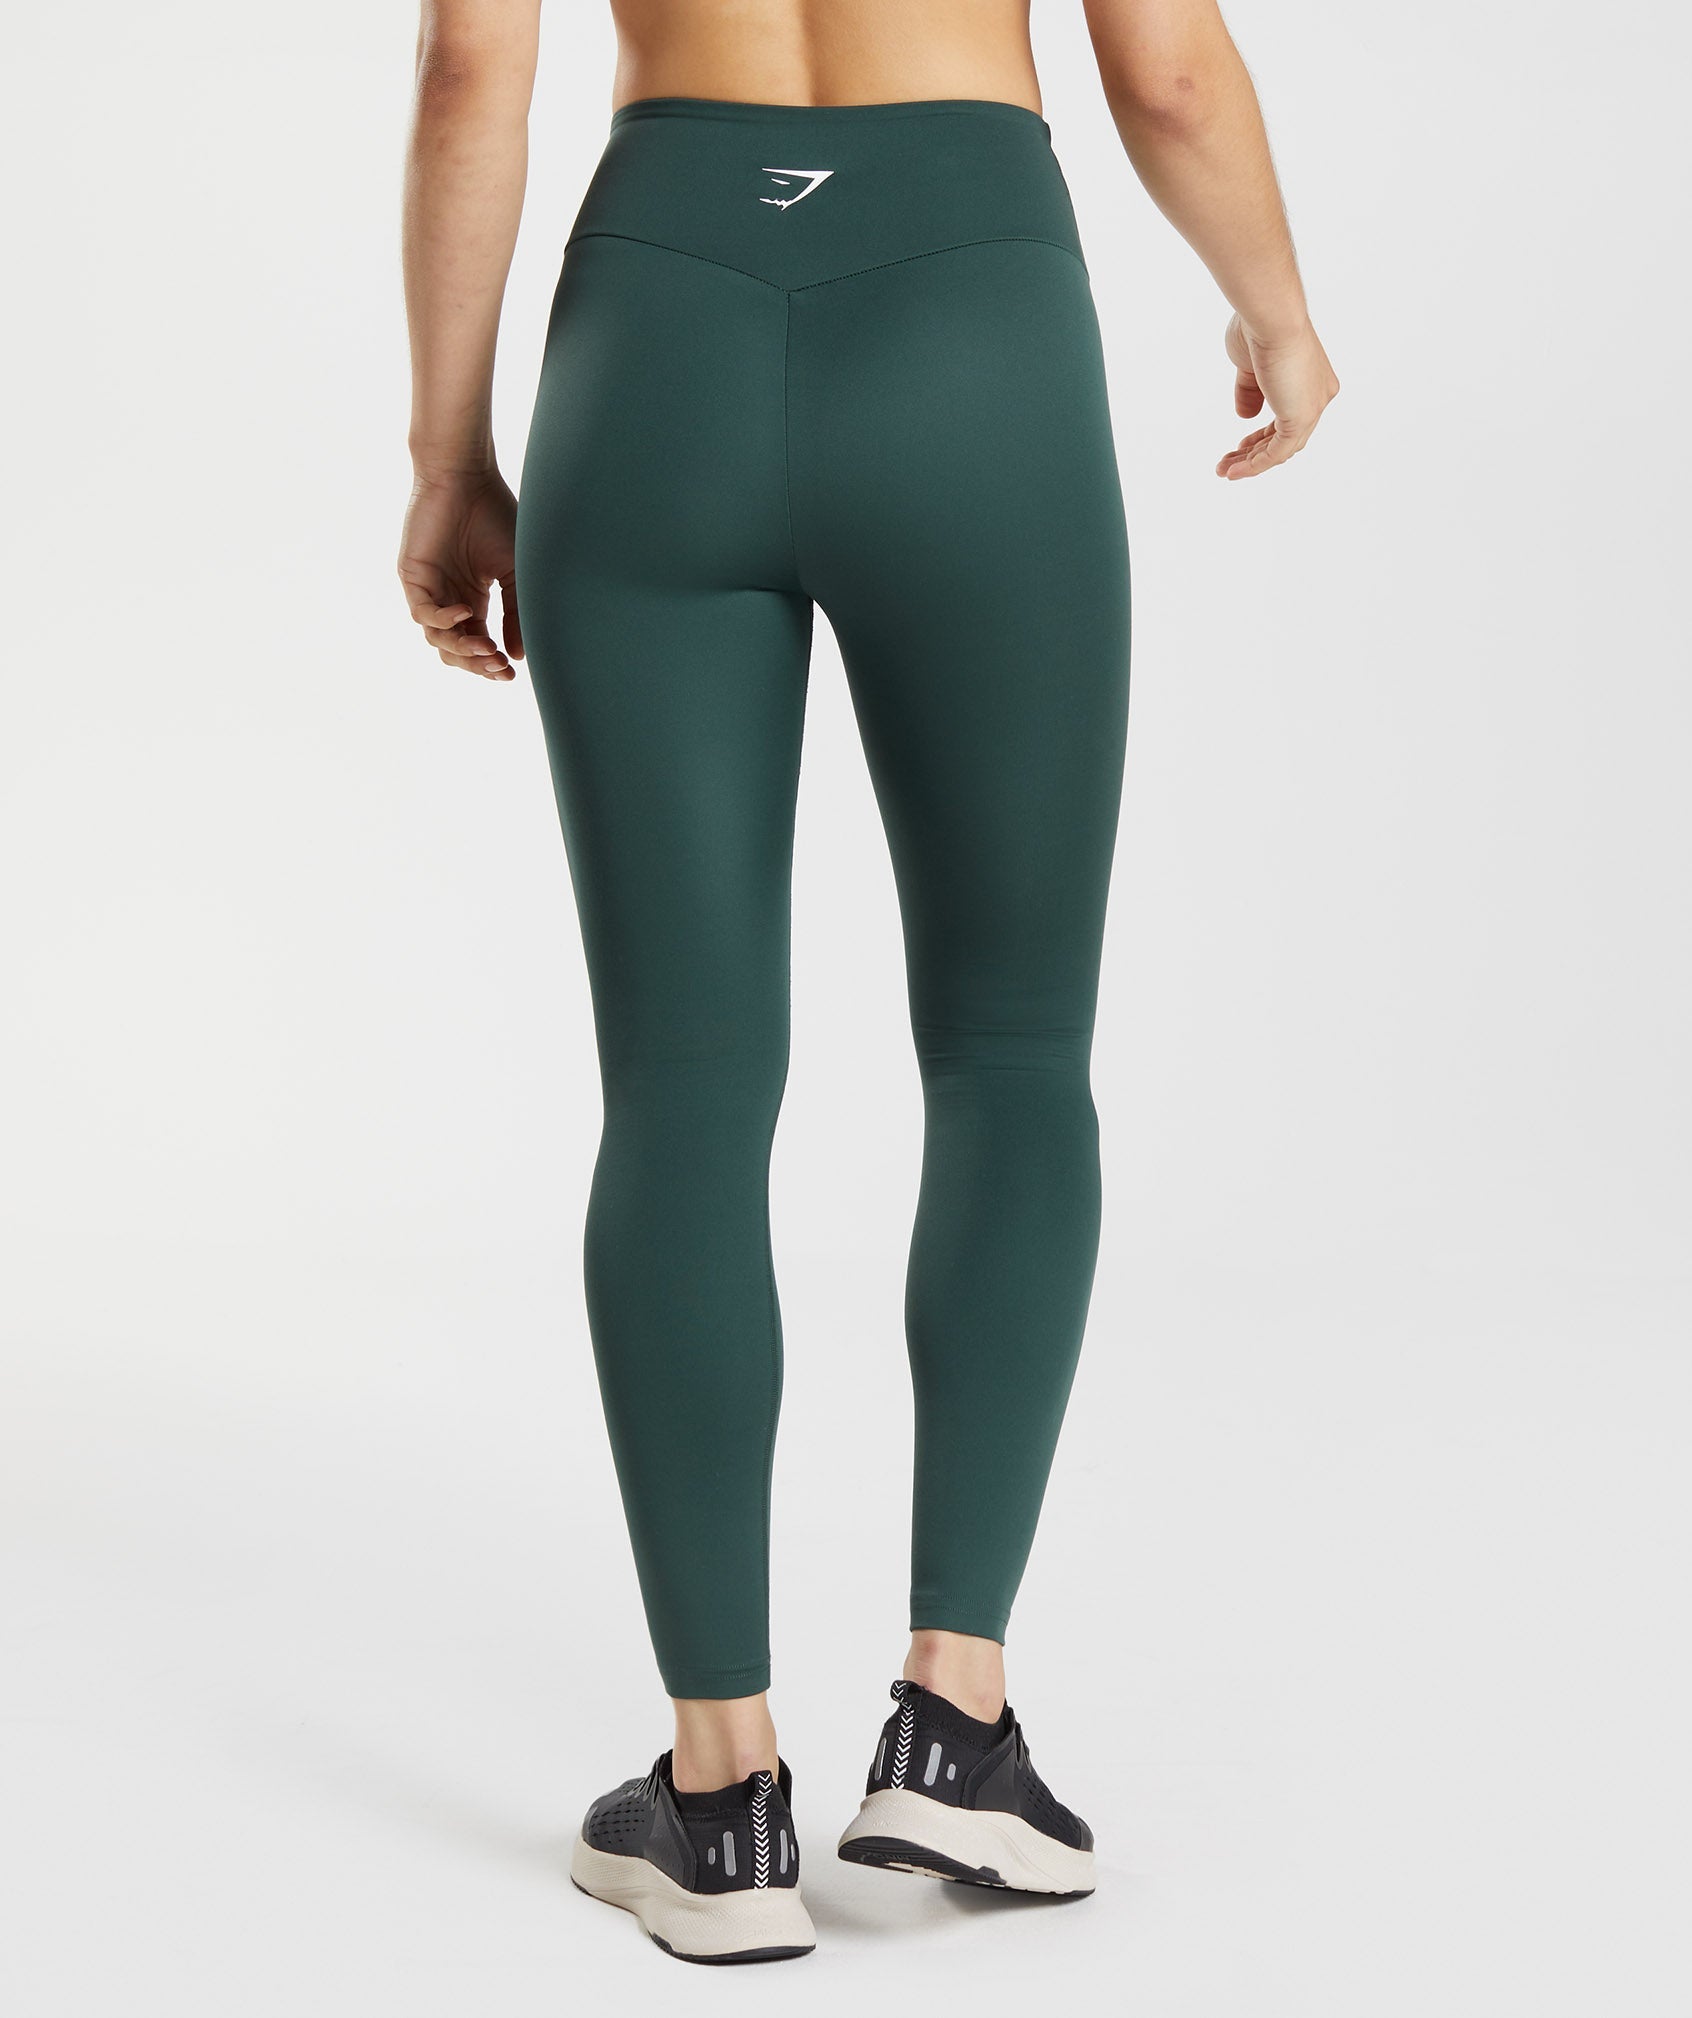 Gymshark Legacy Fitness Leggings Sage Green Size XS - $65 New With Tags -  From Elizabeth